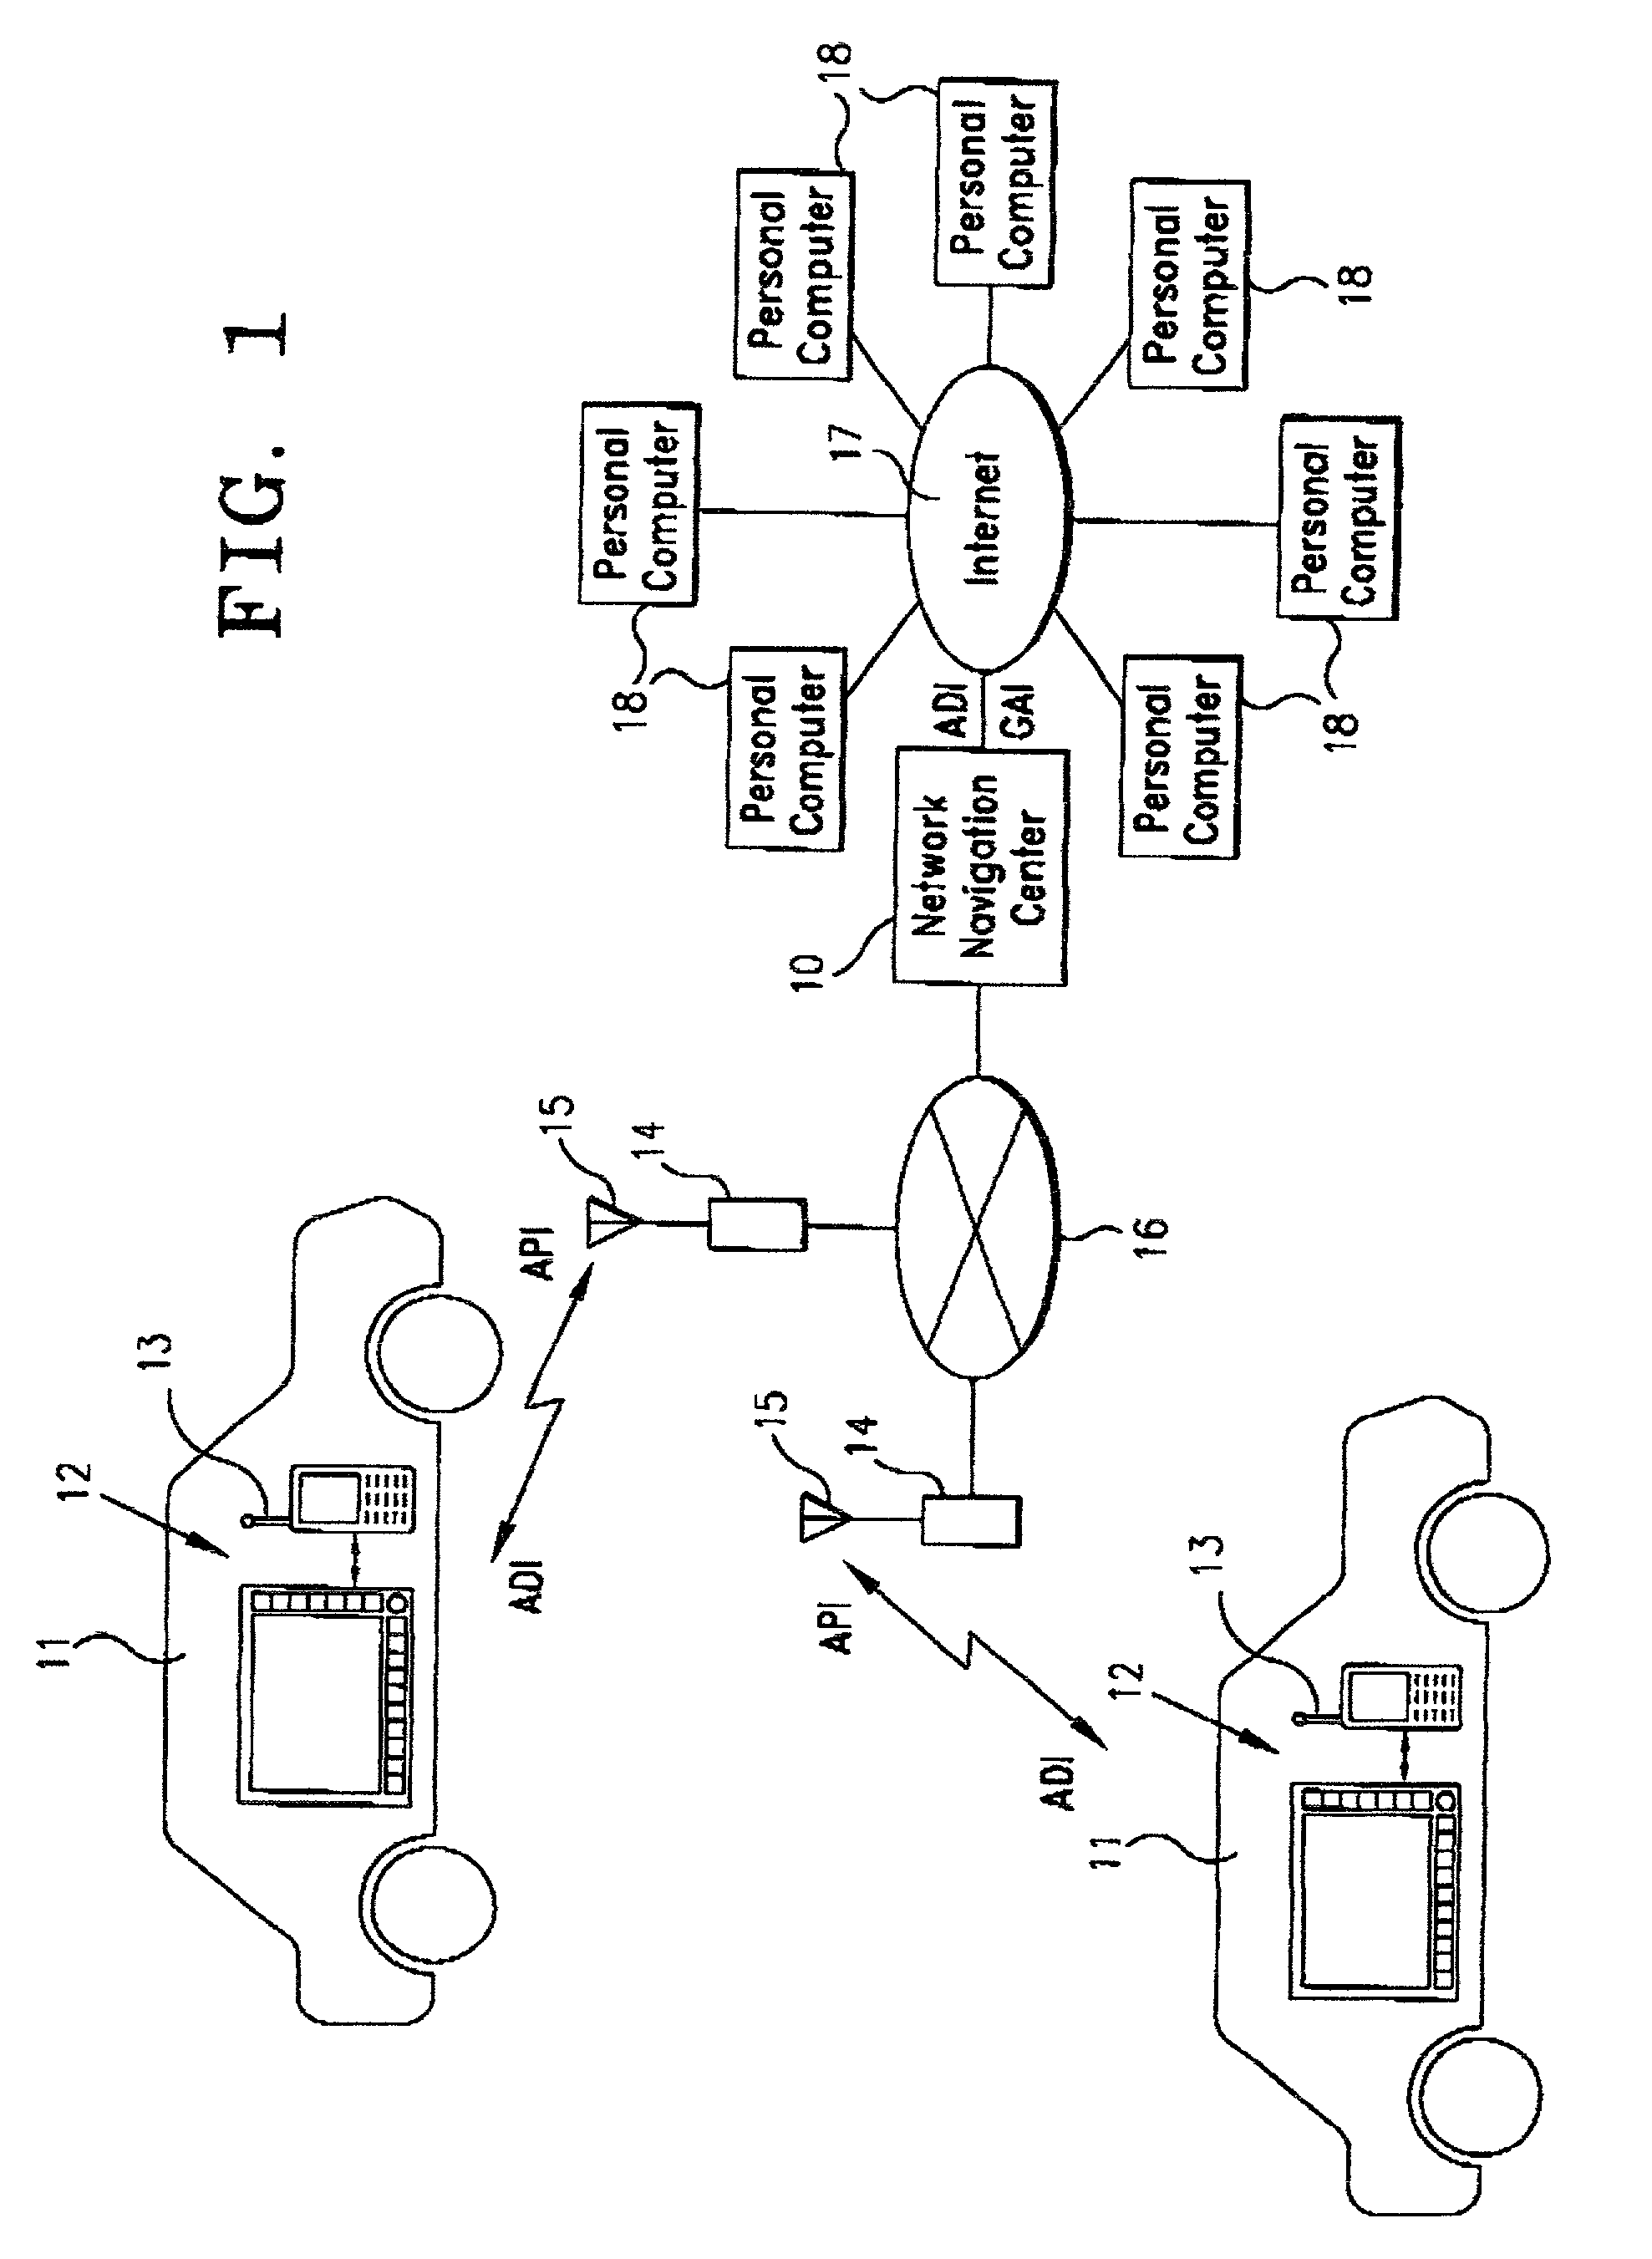 Apparatus and method for delivery of advertisement information to mobile units